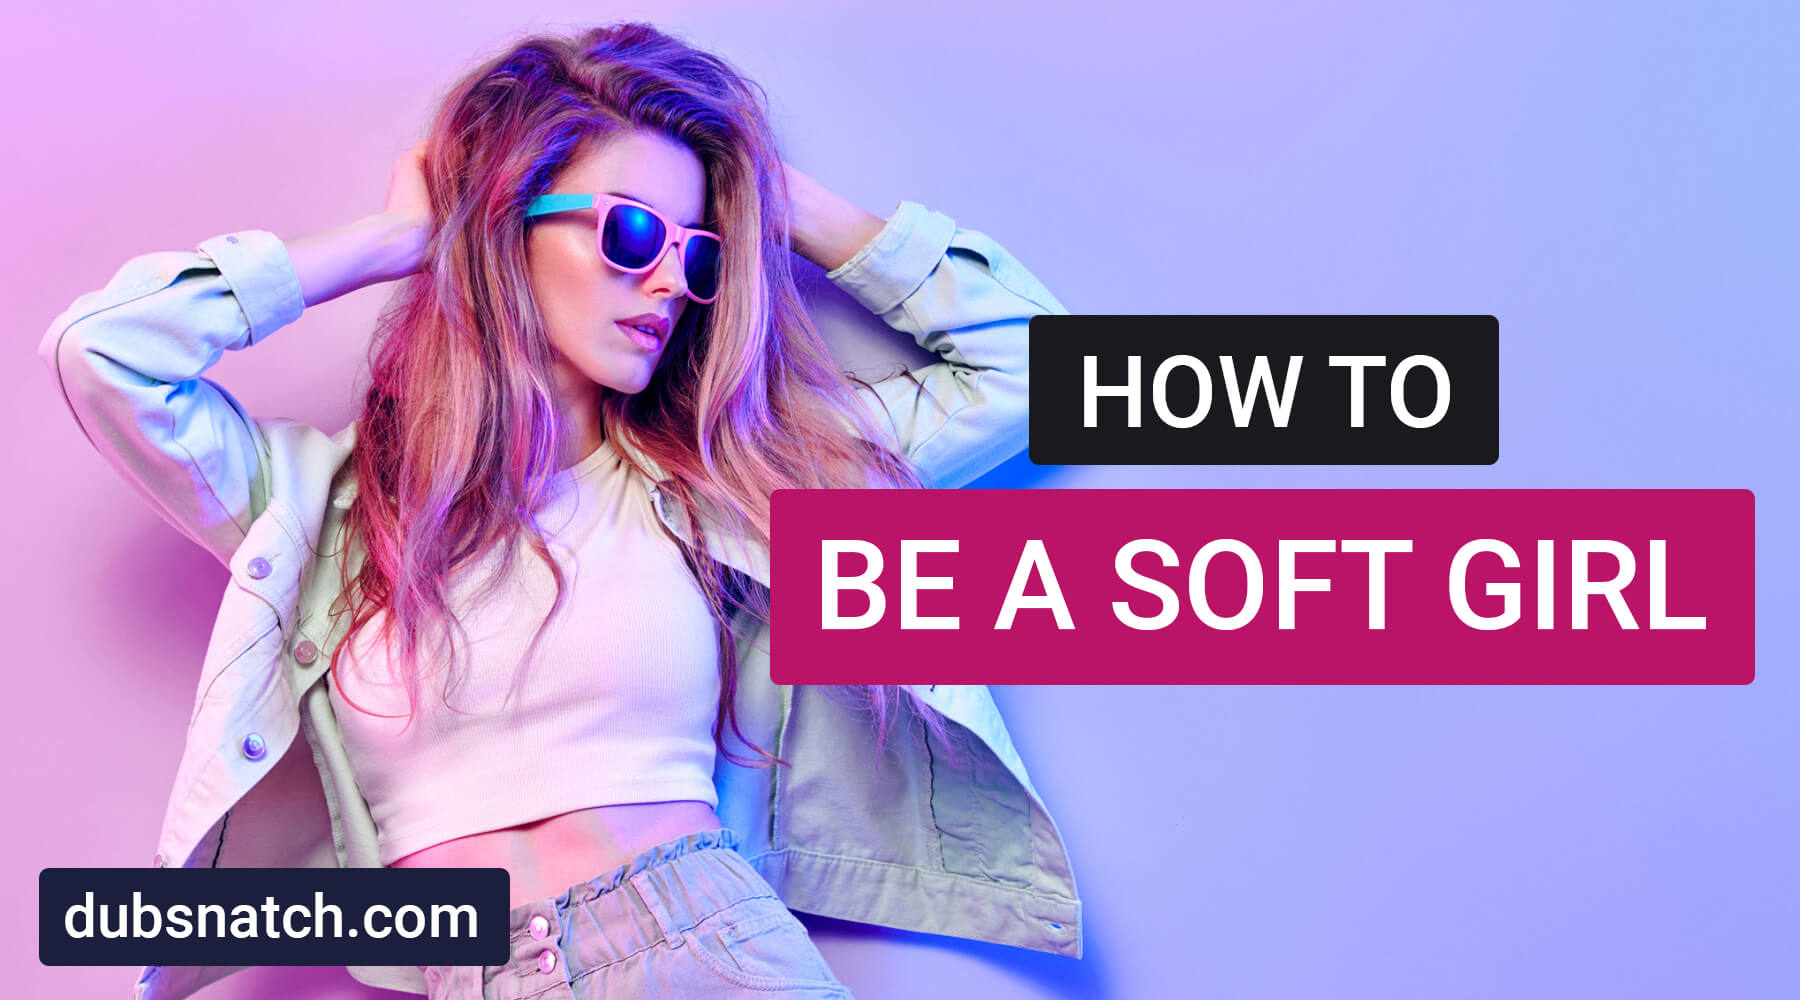 How To Be a Soft Girl - Dubsnatch